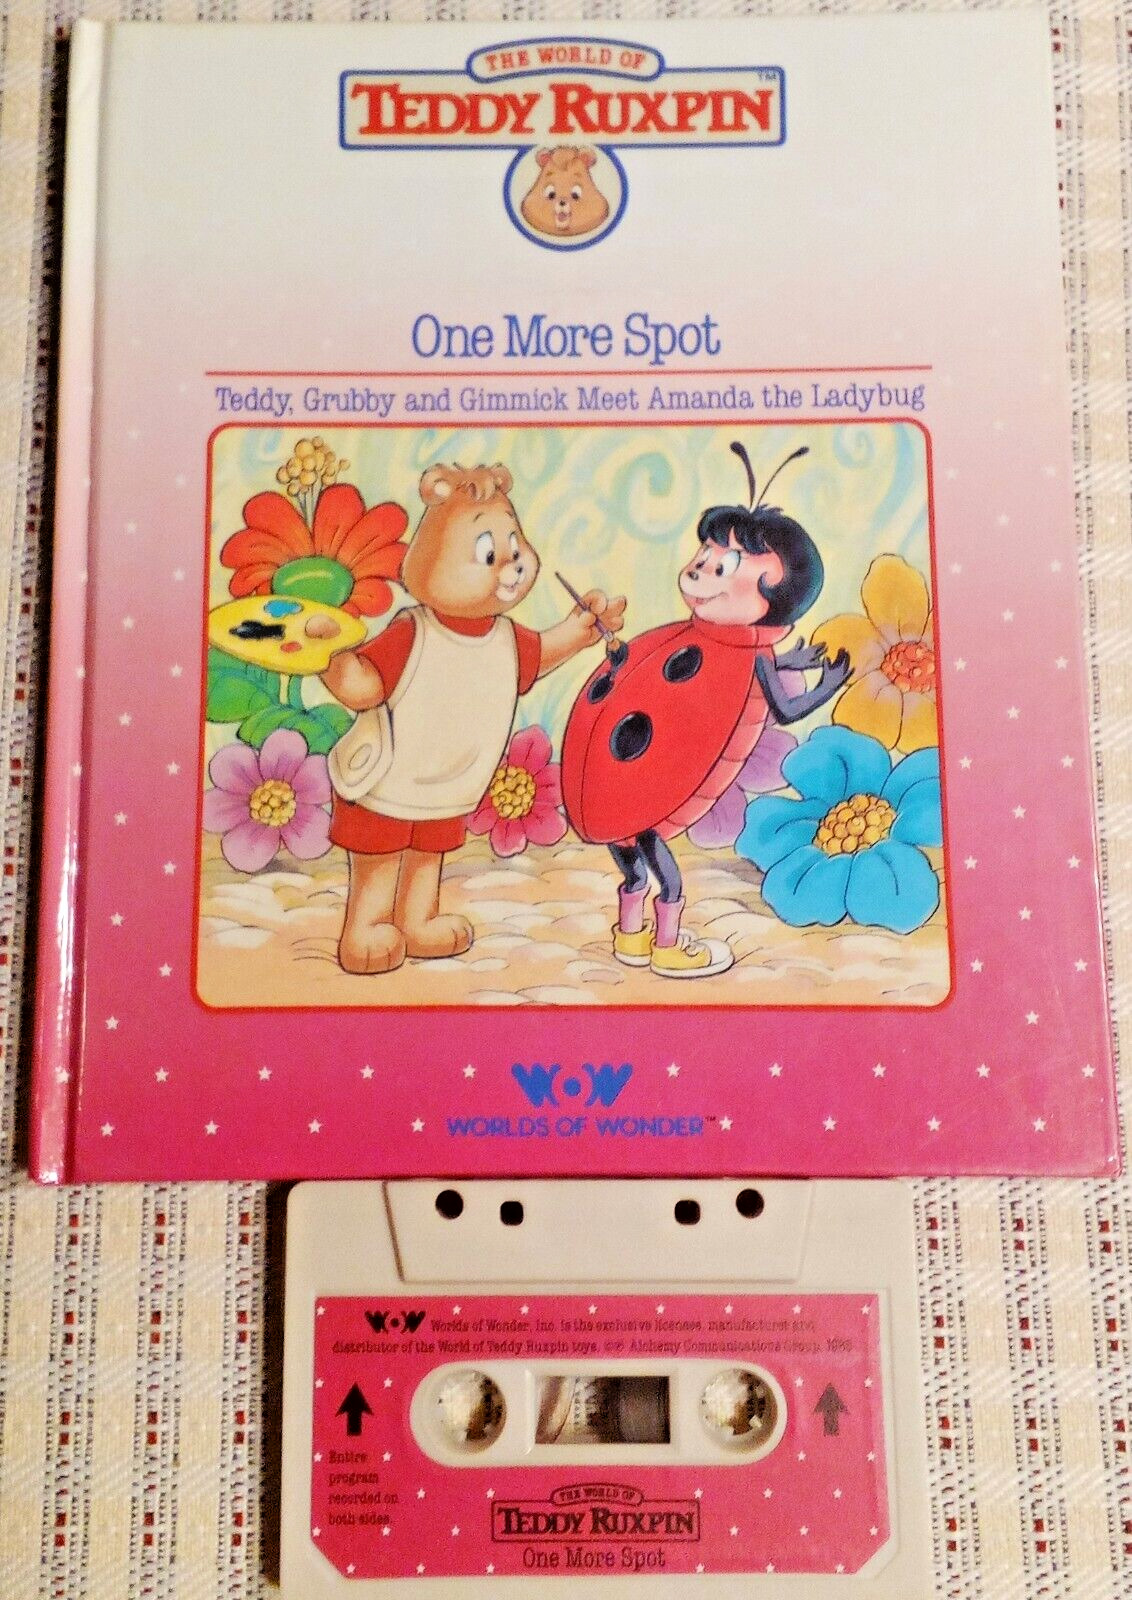 Teddy Ruxpin - One More Spot Book And Cassette Tape - Worlds Of Wonder 1985